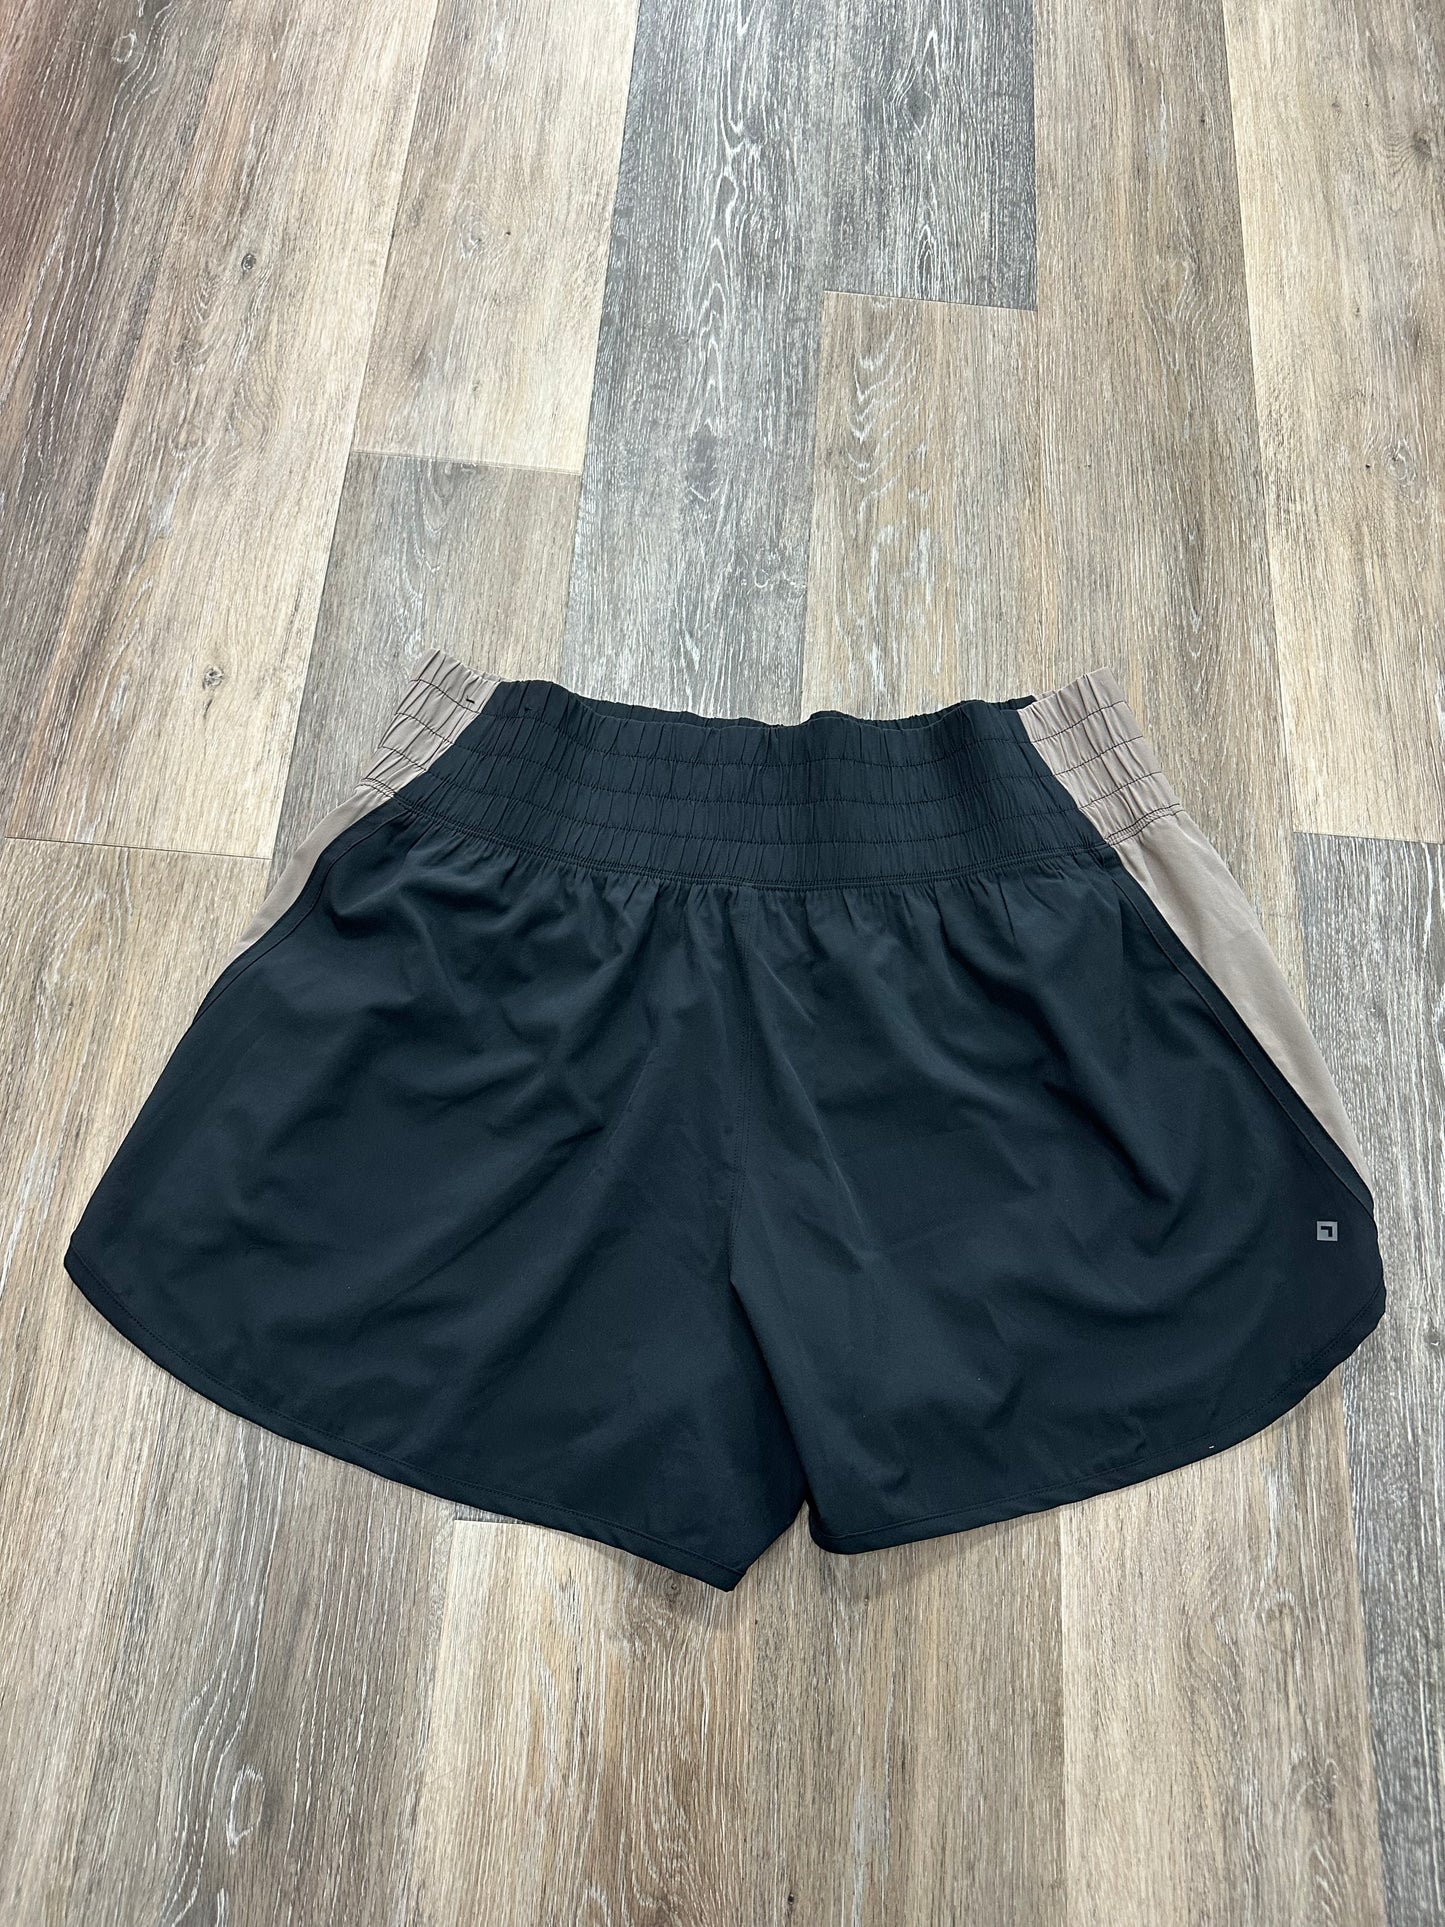 Athletic Shorts By Abercrombie And Fitch  Size: Xl